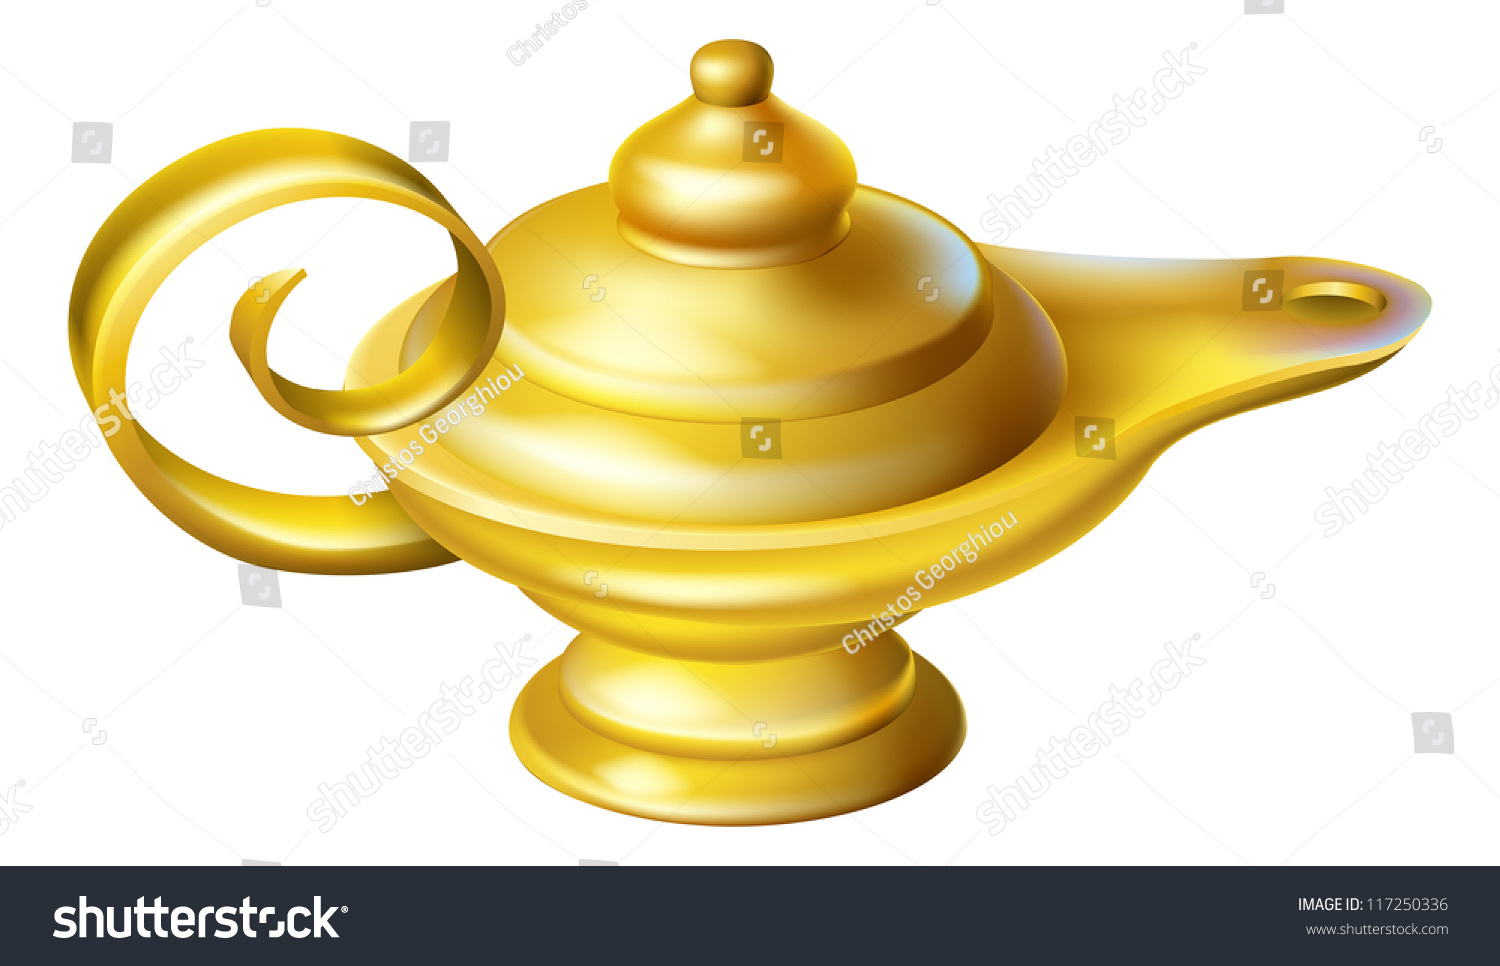 Illustration Old Fashioned Oil Lamp Like Stock Vector 117250336 in Old Fashioned Oil Lamps